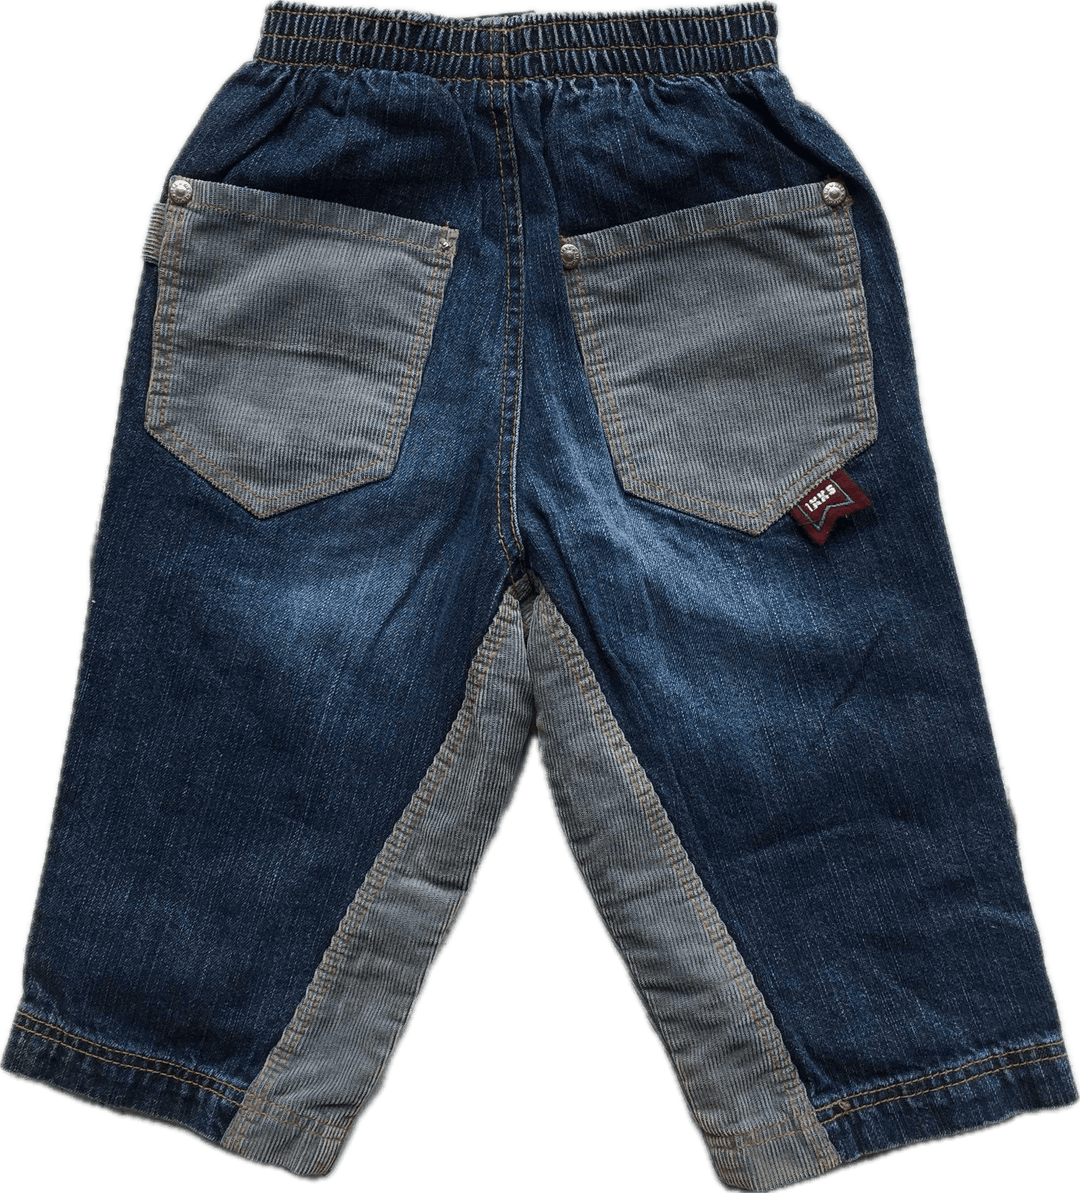 NWT - IKKS French Cord Panel Boys Pull on Jeans - Jean Pool